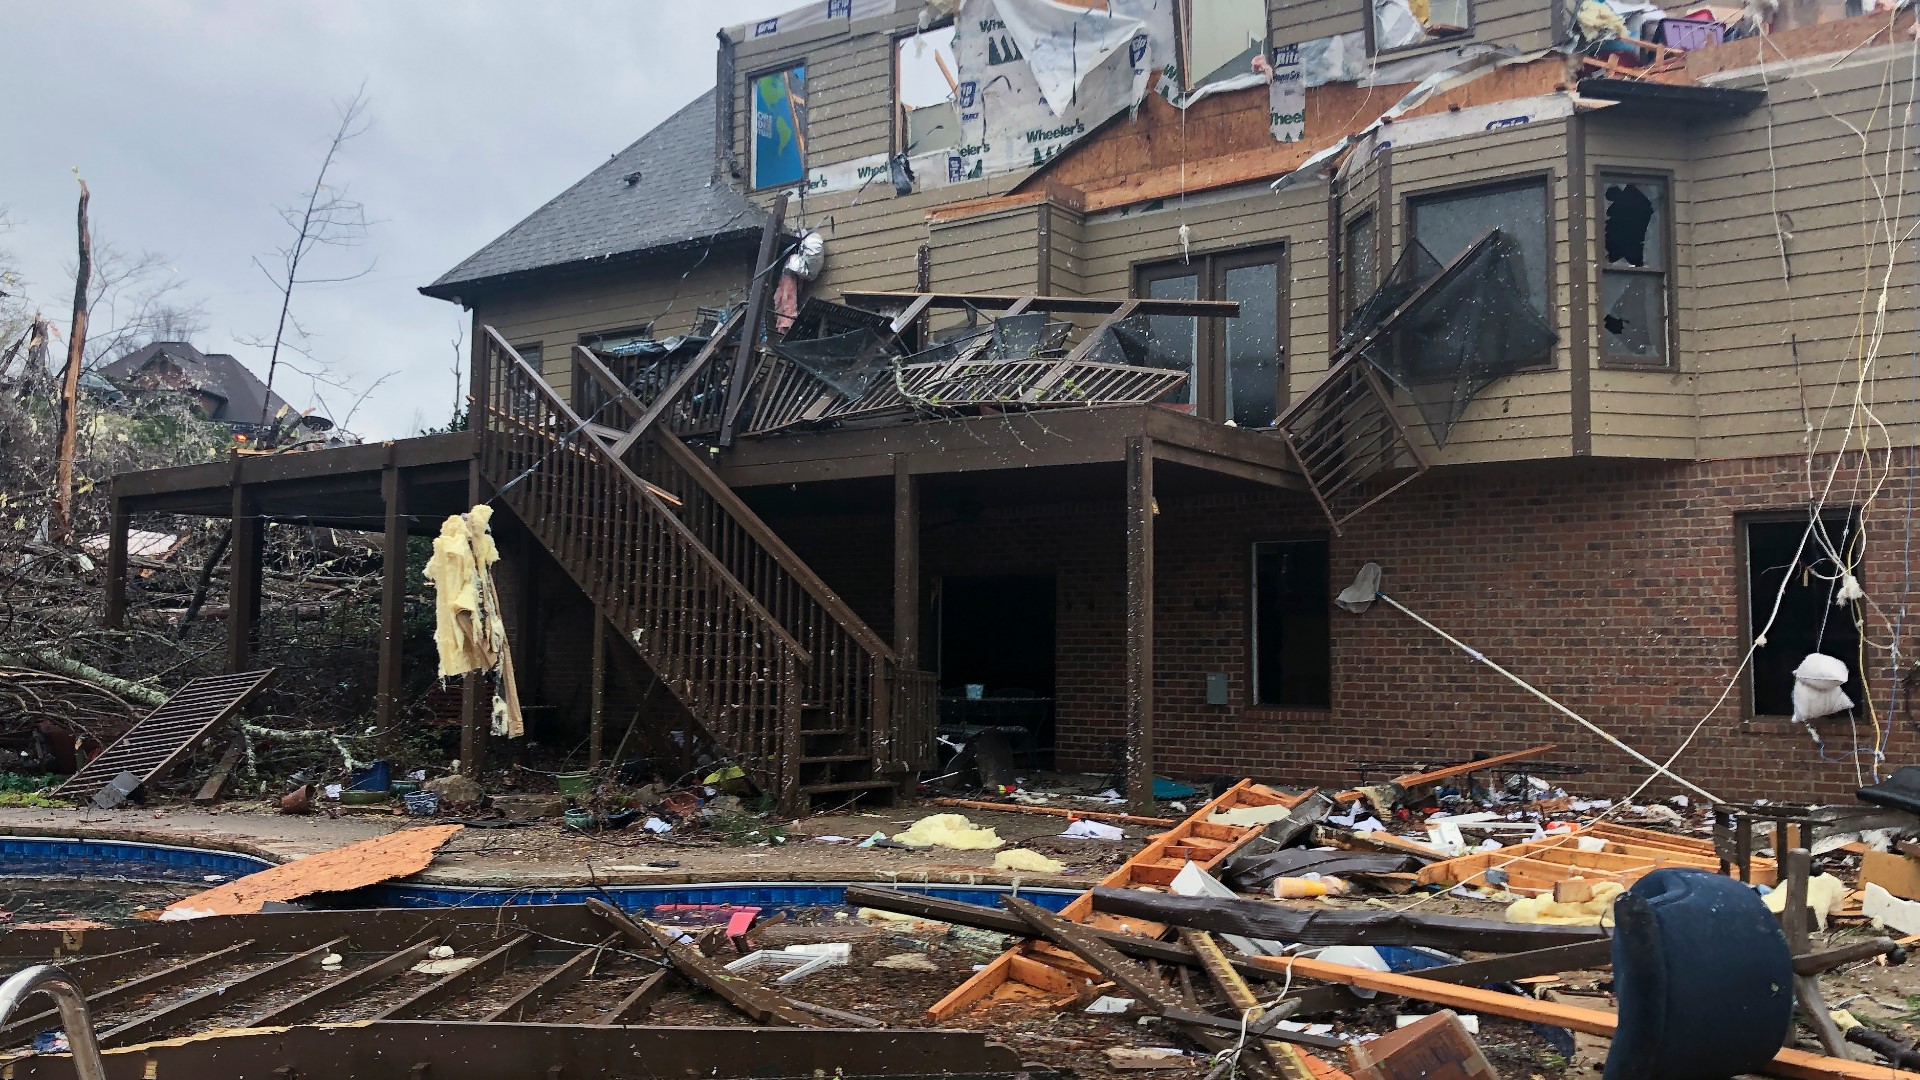 Several people have died as a result of severe weather and devasting tornadoes across the Mid-South for the second Thursday in a row.